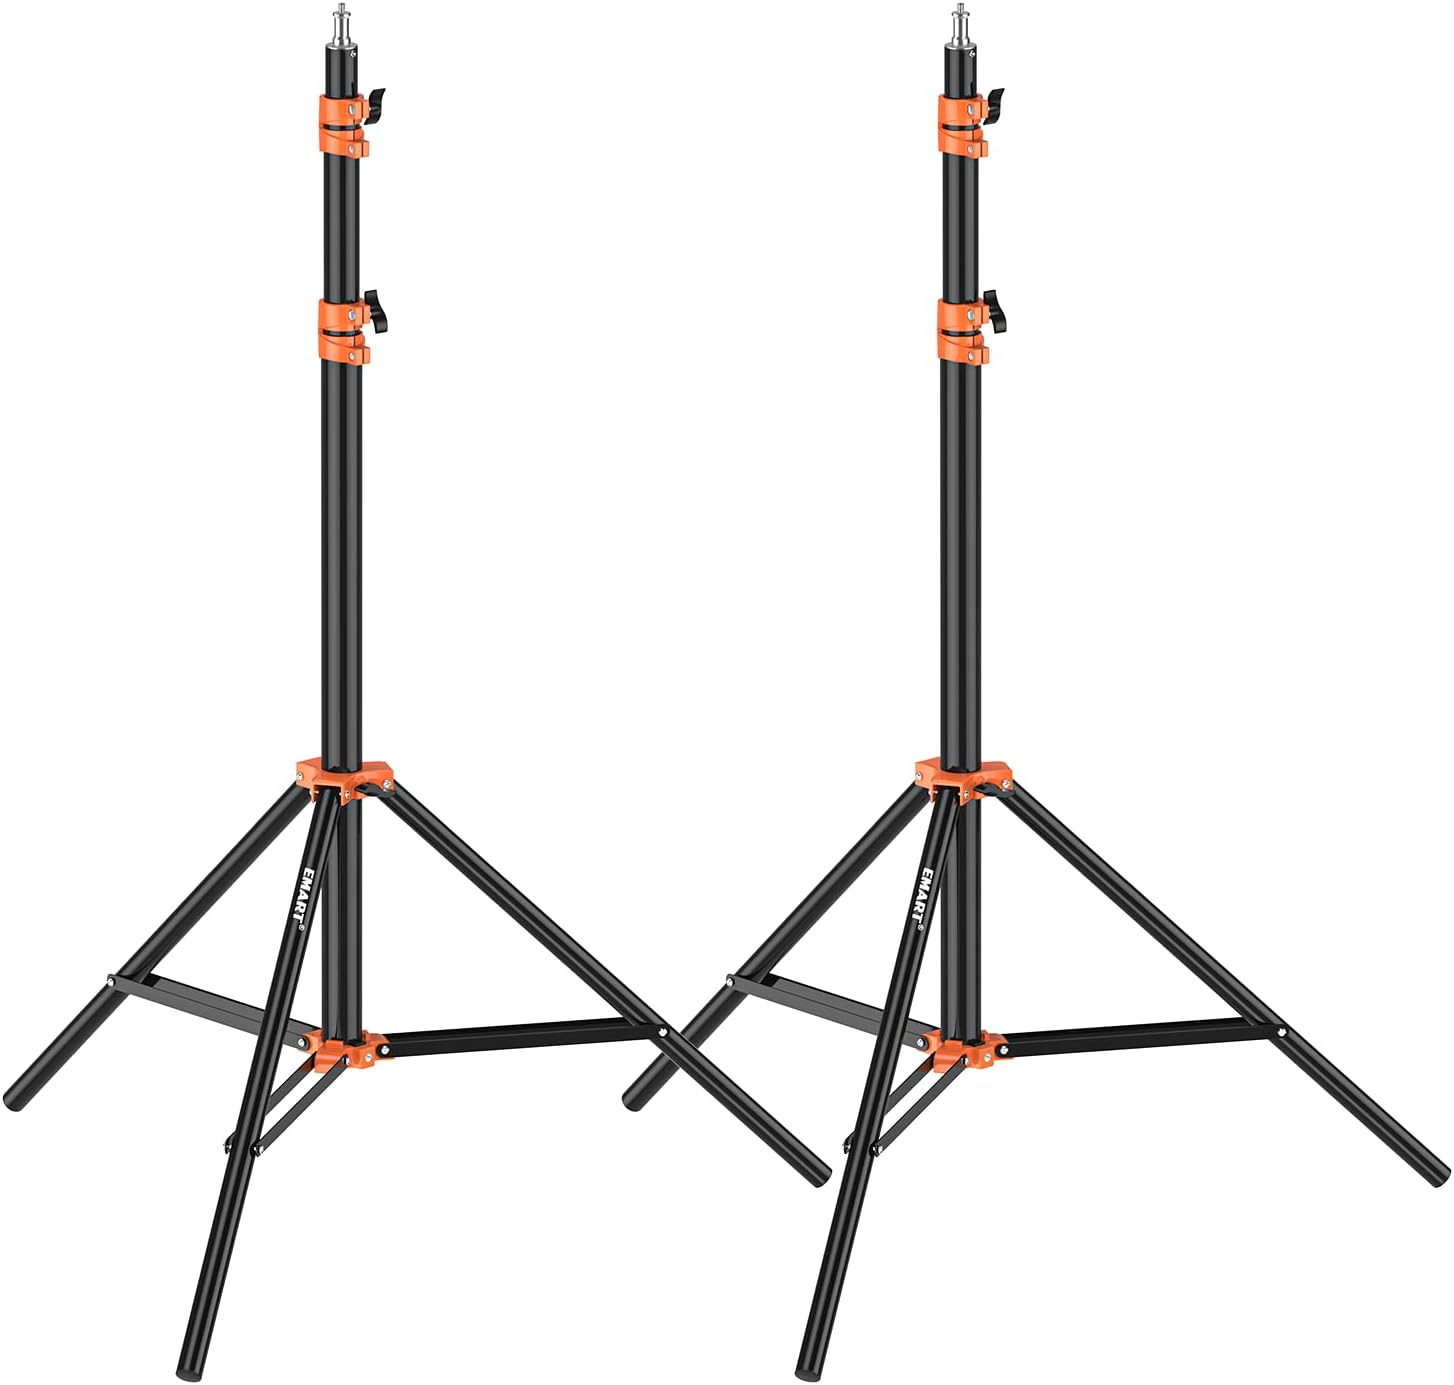 7ft/2.1m Air Cushioned Heavy Duty Light Stand- 2 Pack